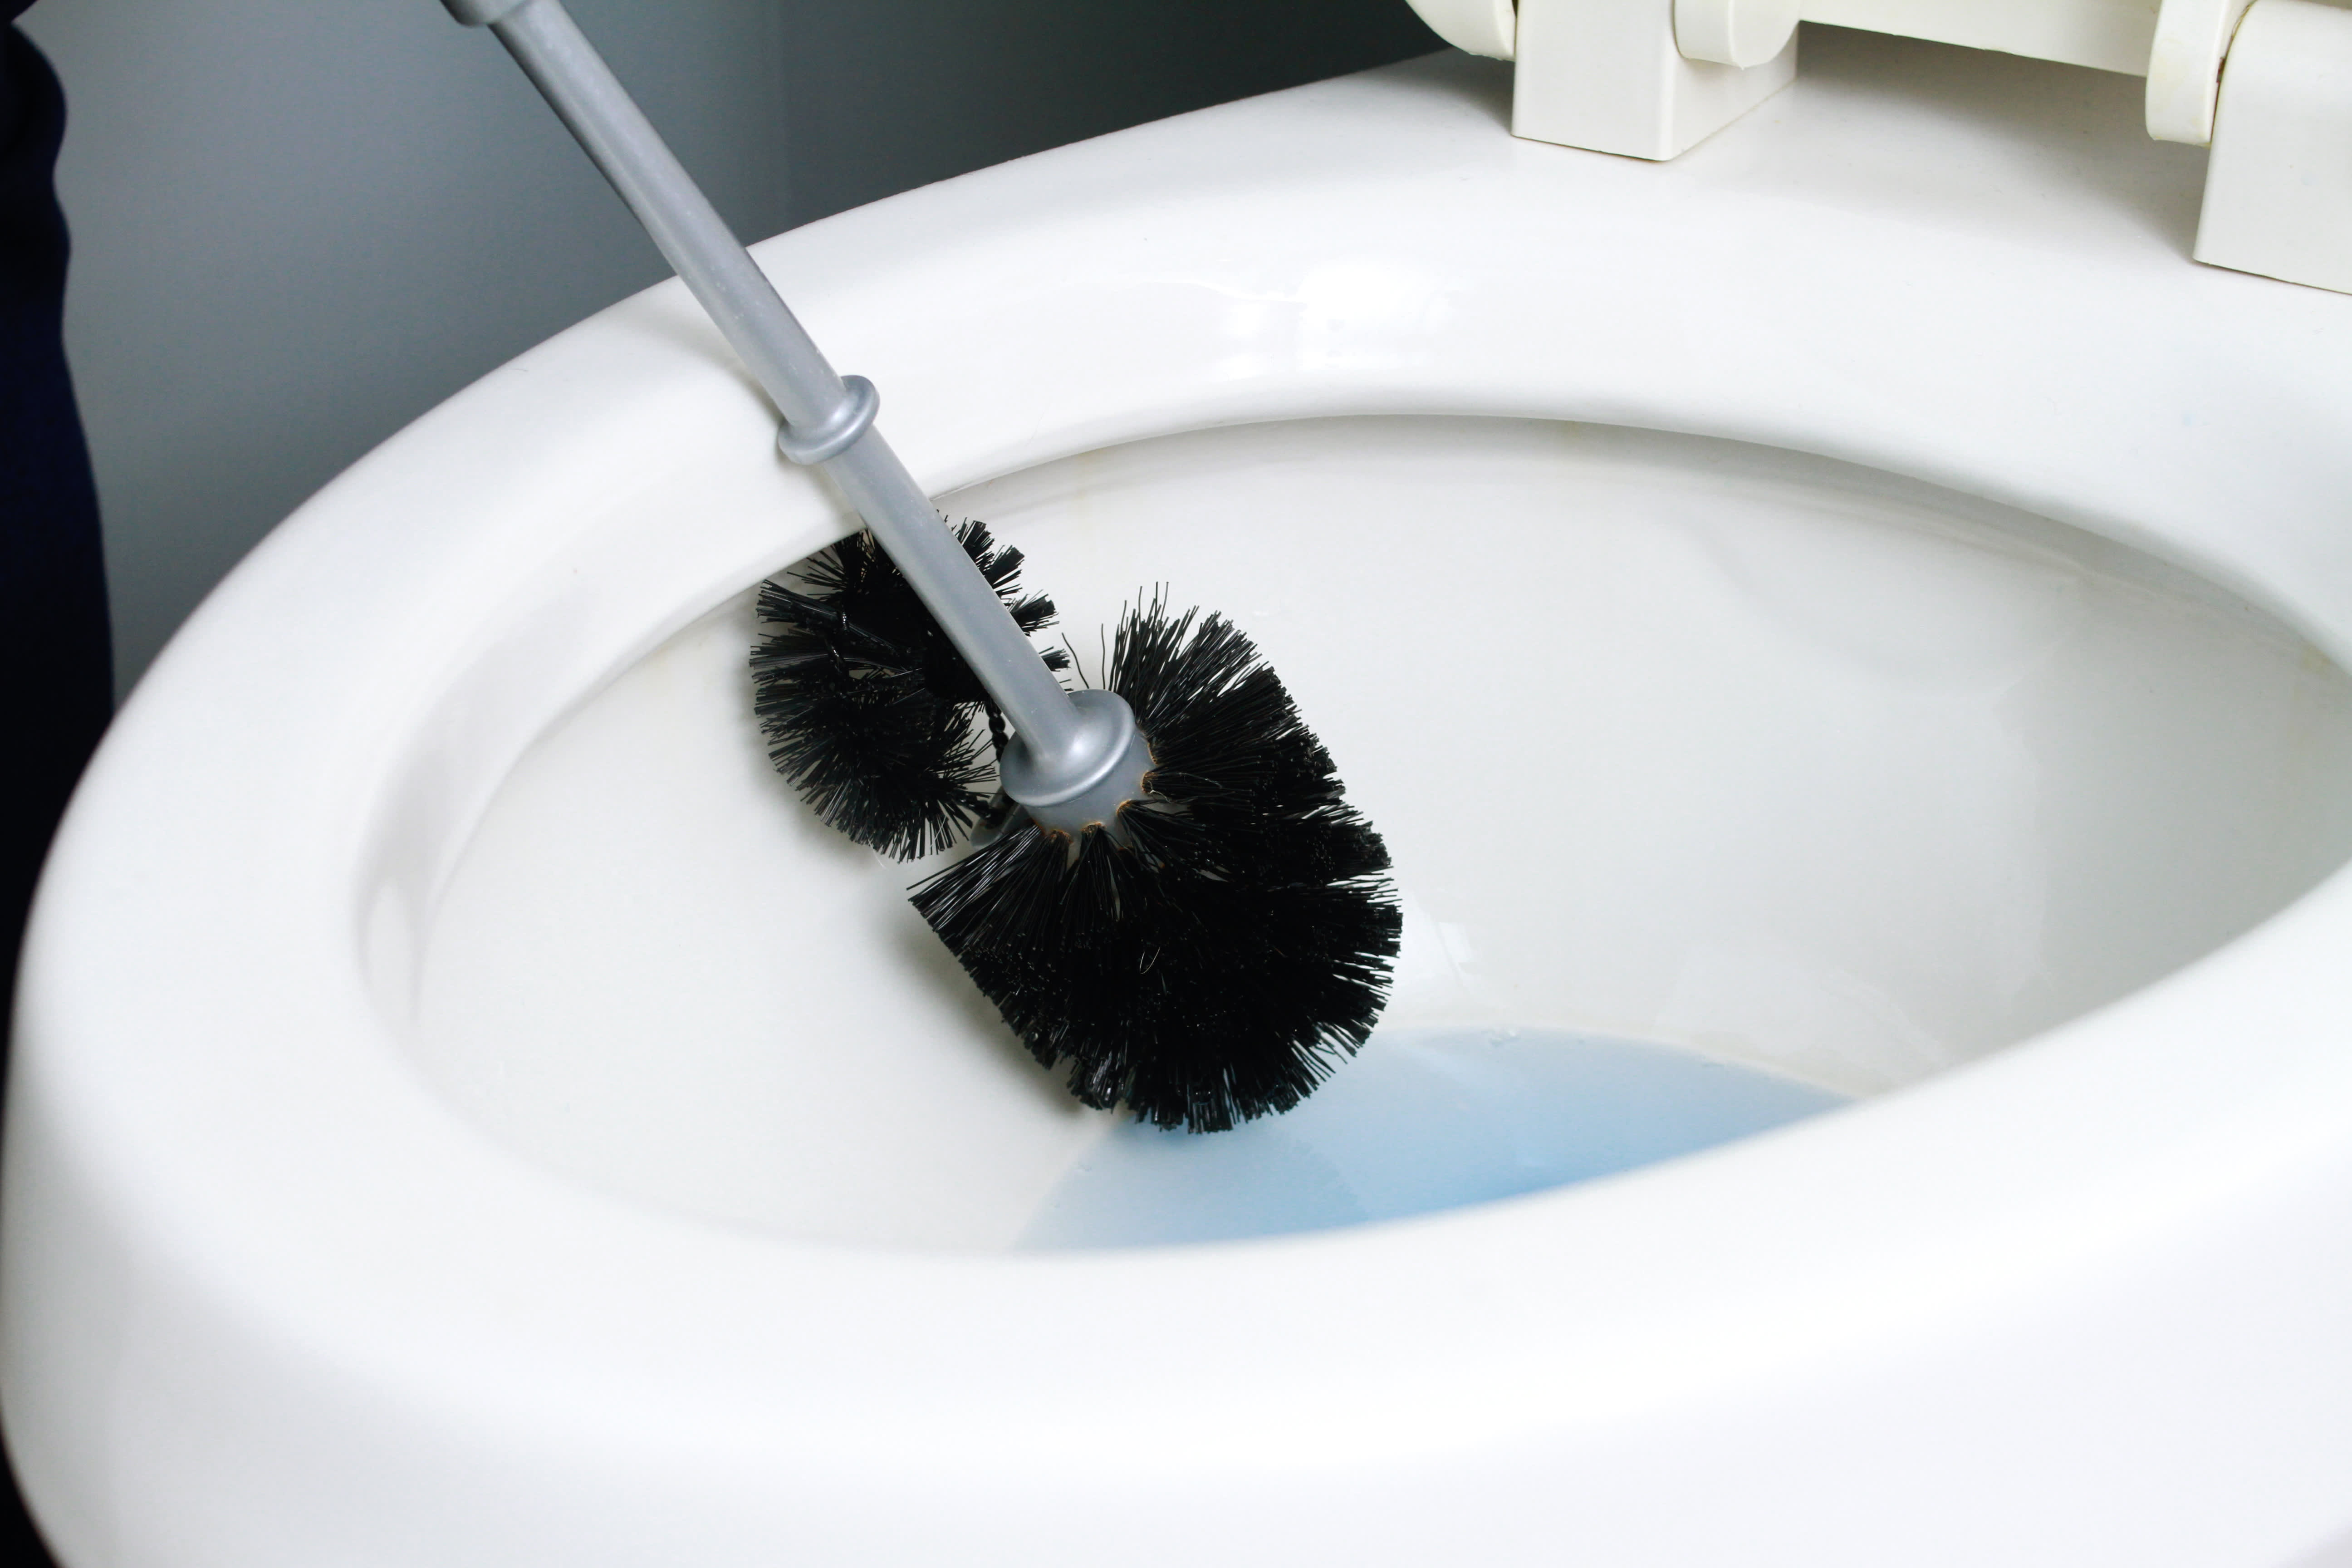 How to Clean a Toilet the Right Way (Yes, There's a Right Way)